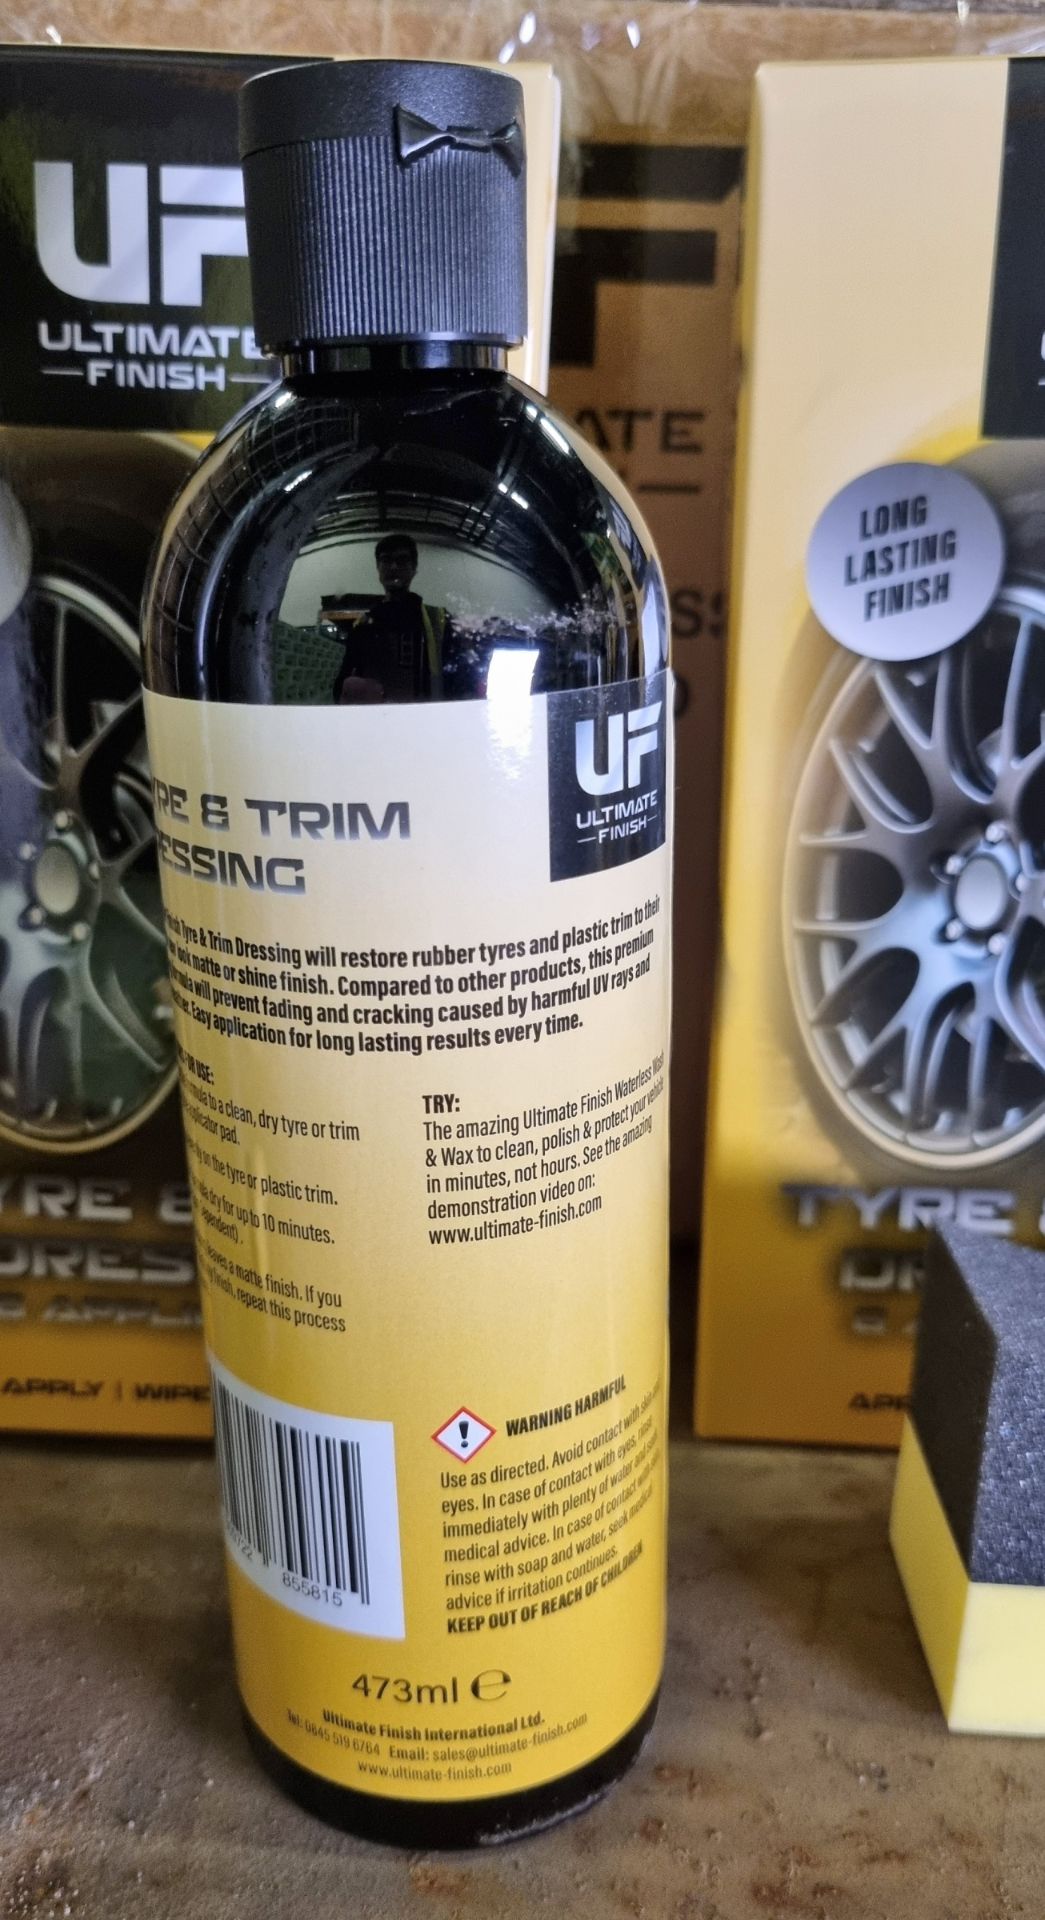 51x Ultimate Finish tyre & trim dressing kits (473ml bottle and applicator per pack) - Image 4 of 6